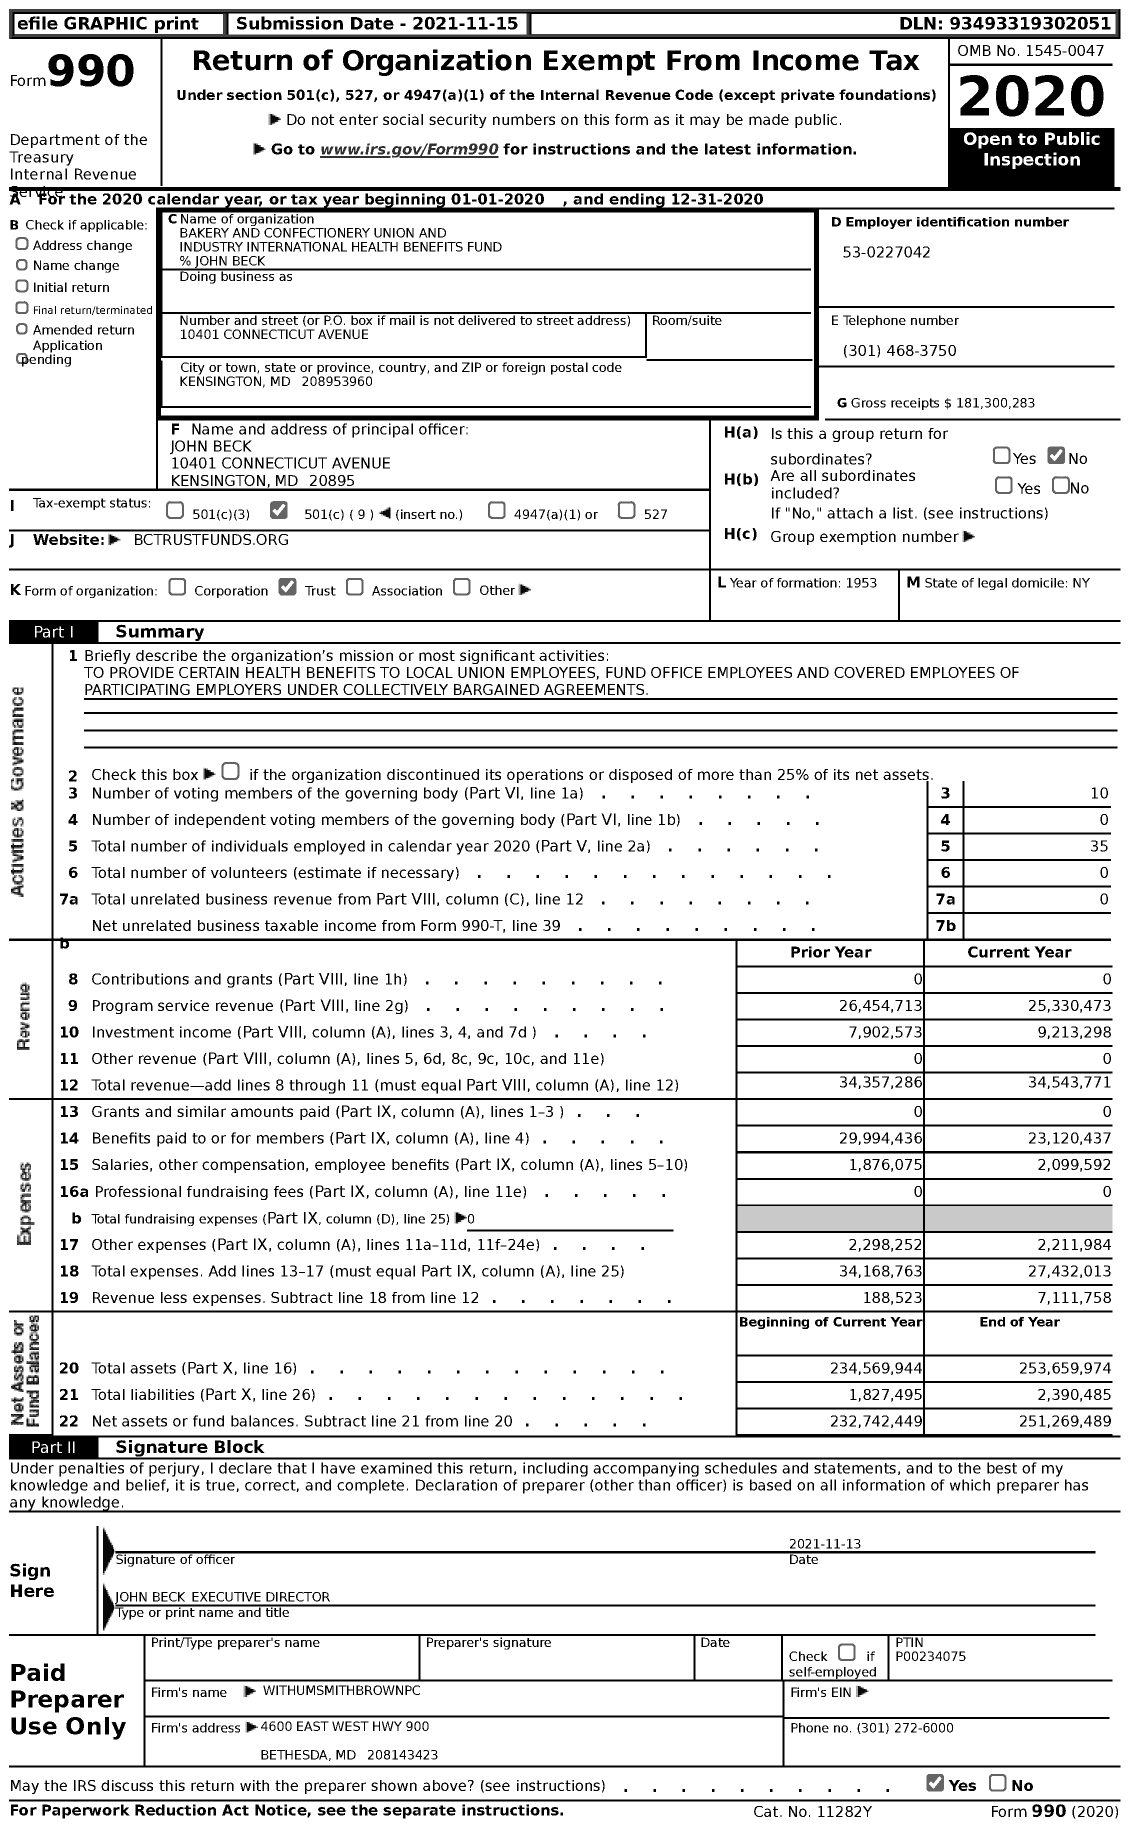 Image of first page of 2020 Form 990 for Bakery and Confectionery Union and Industry International Health Benefits Fund